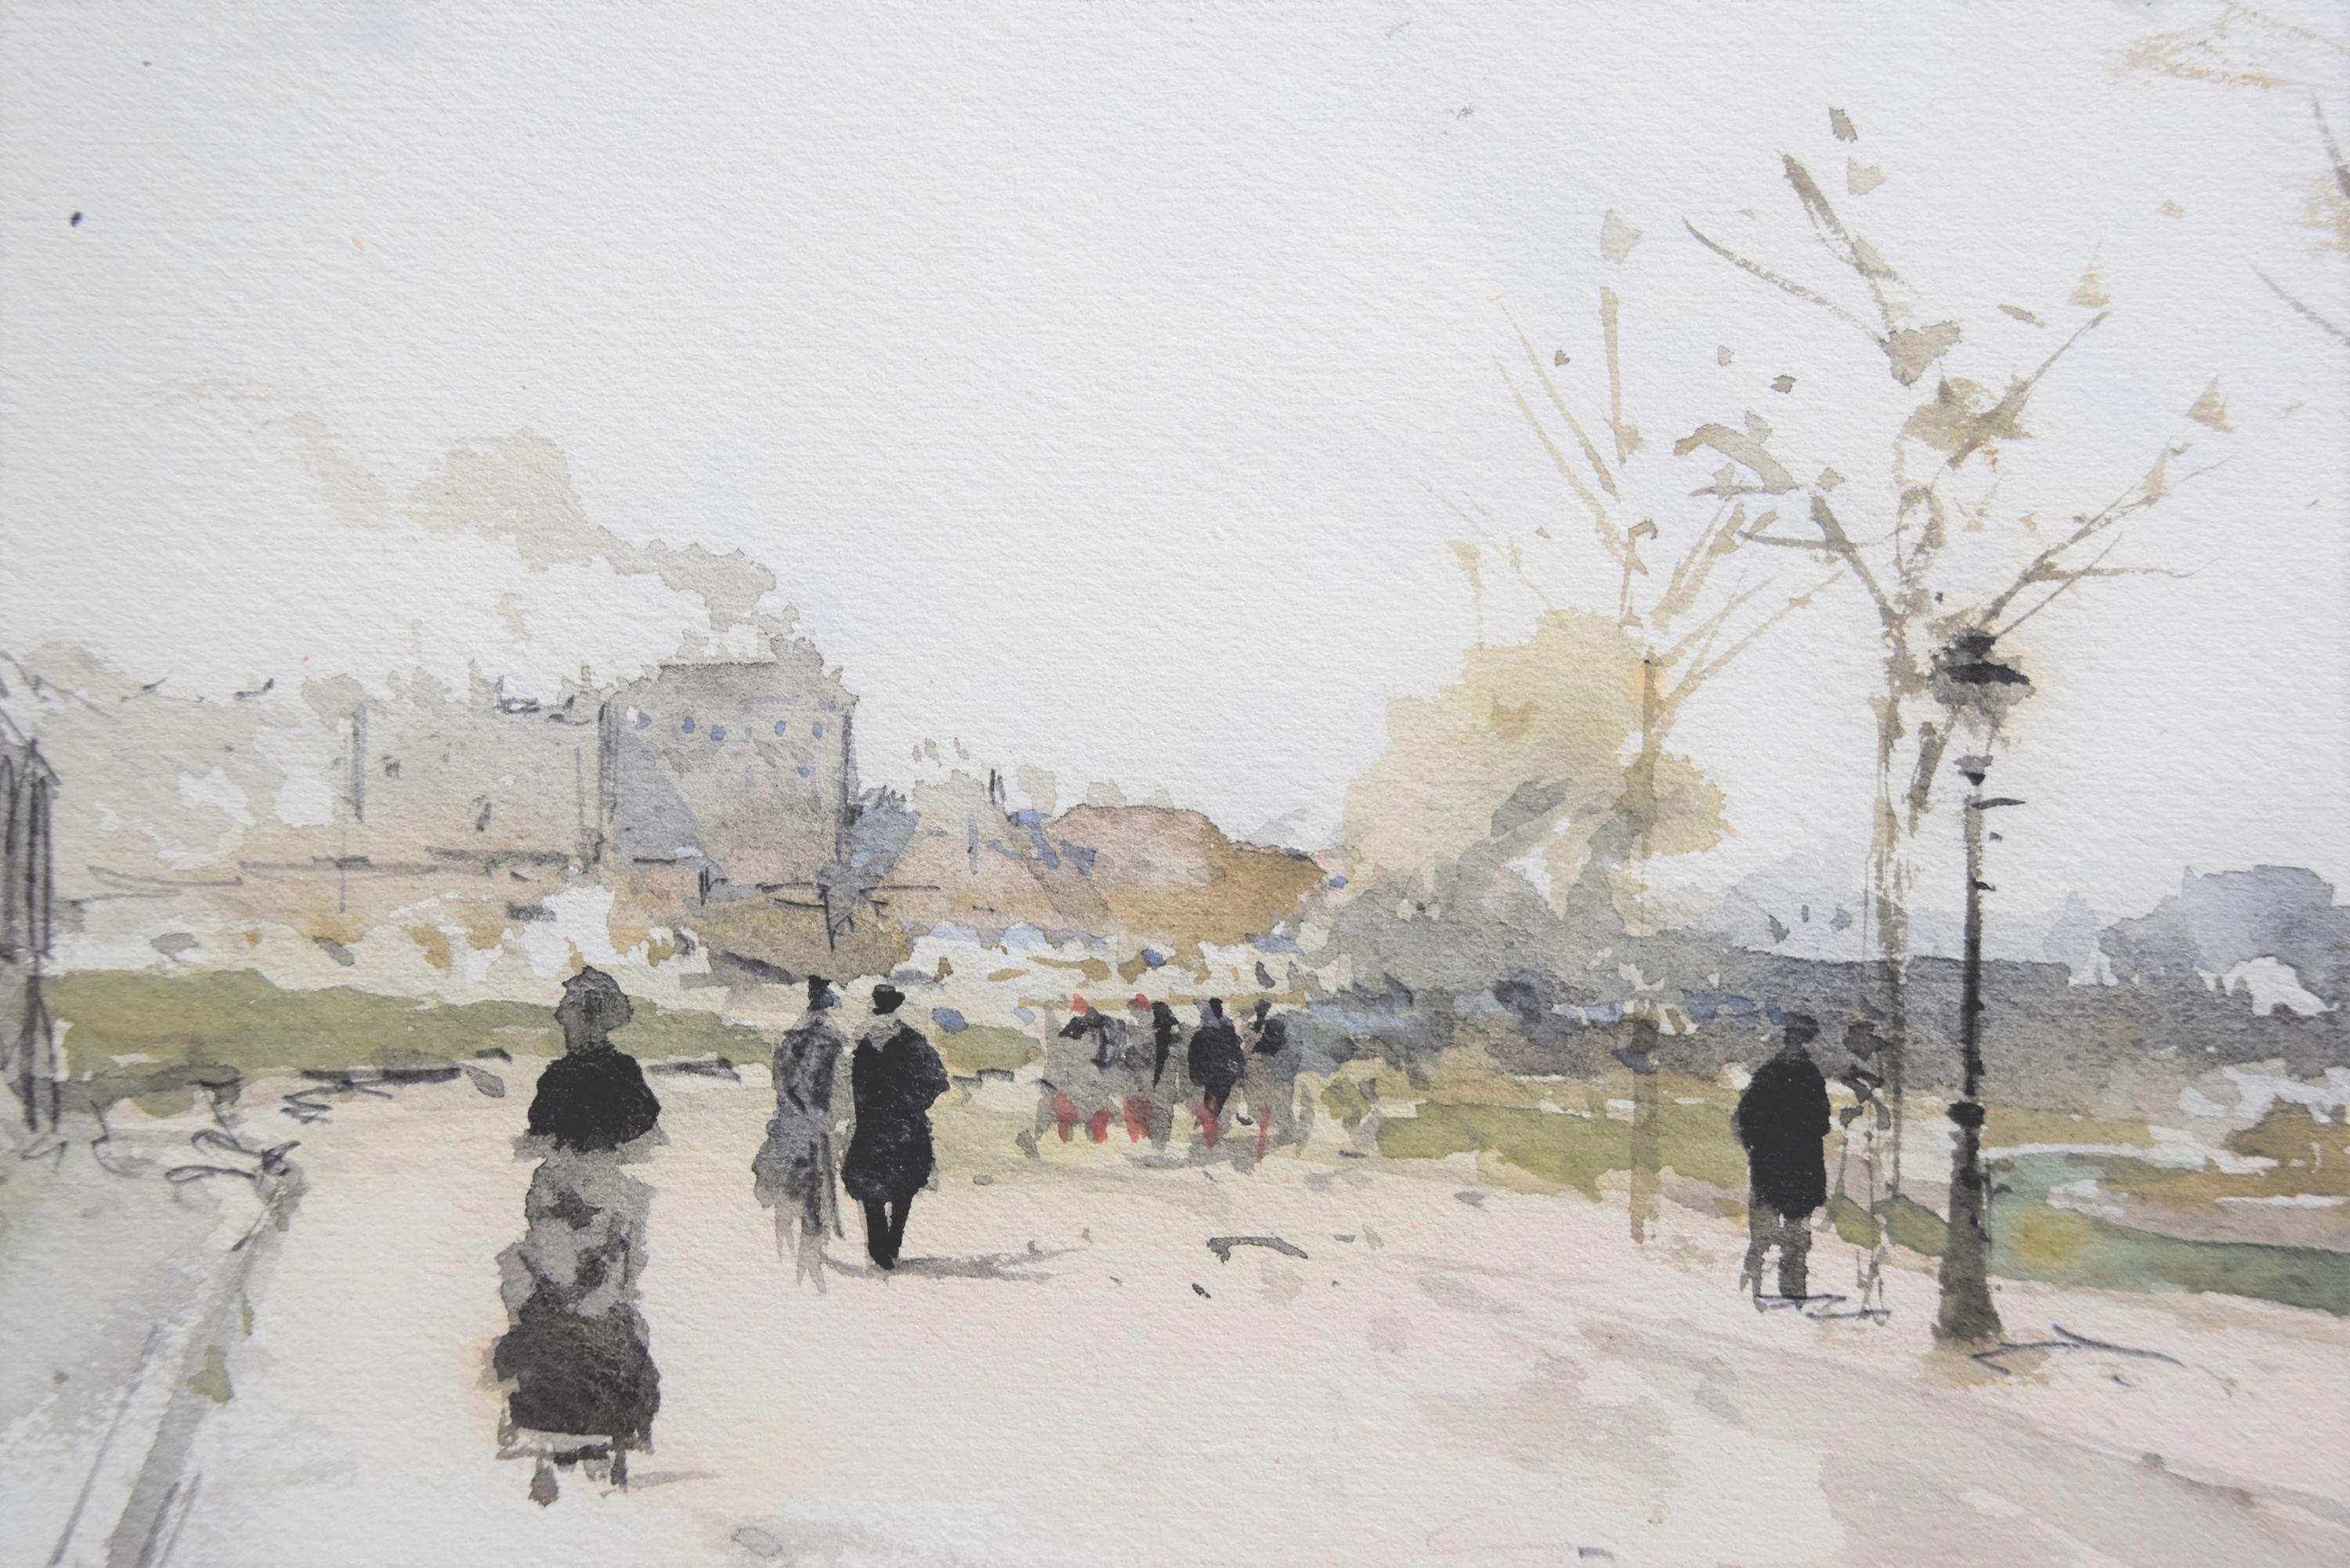 Luigi Loir (1845-1916)
The Walk along the river
Watercolor
Signed, dated (18)83 and dedicated 